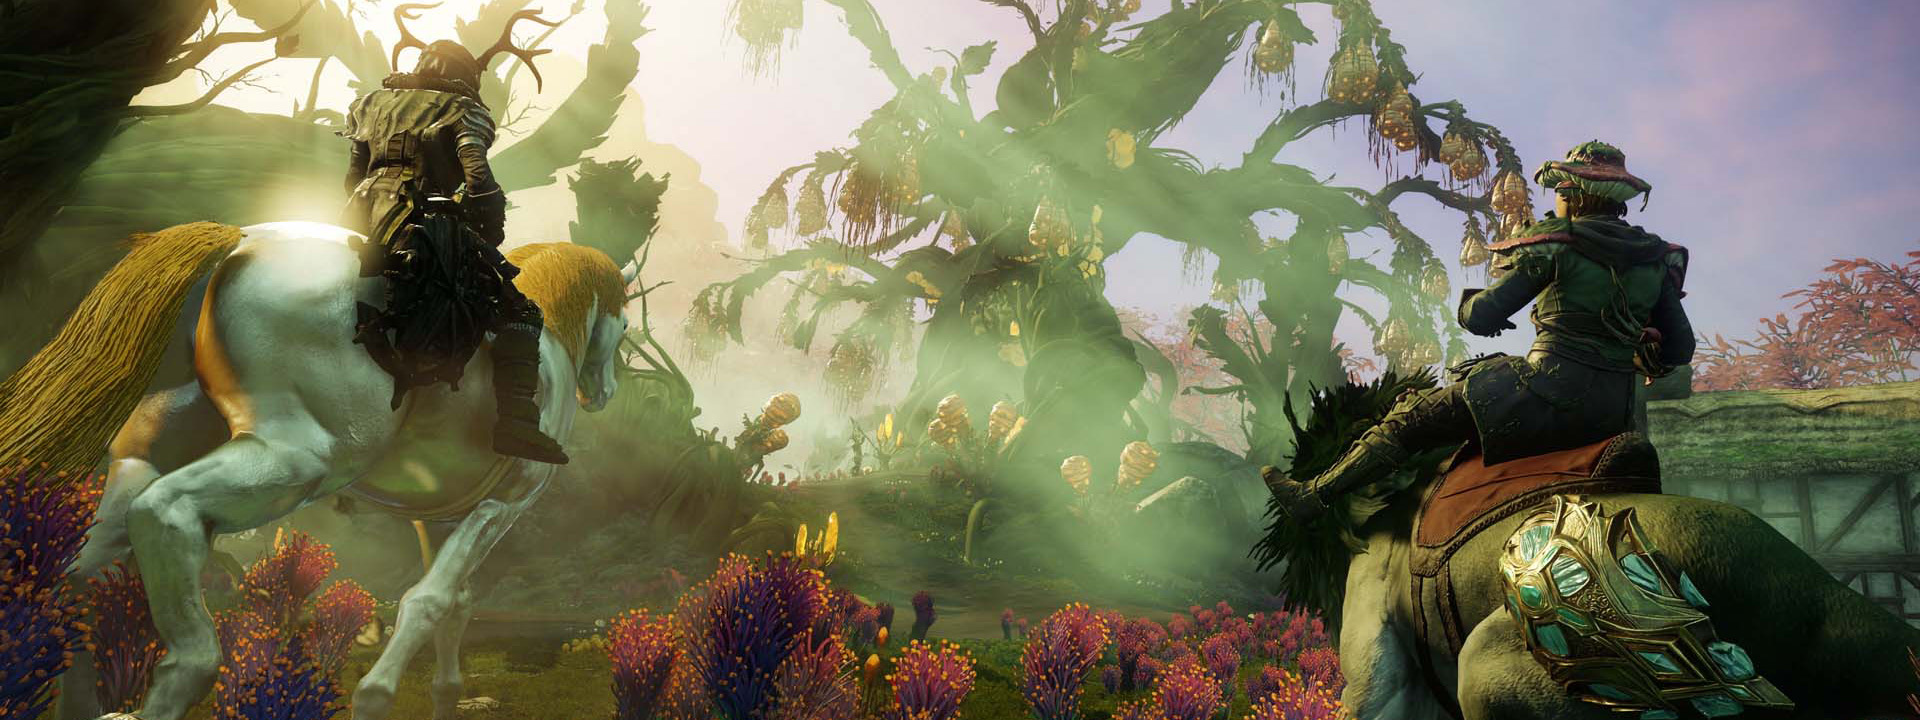 Two Adventurers ride through Elysian Wilds on Mounts, stopping in some unusual red flora.